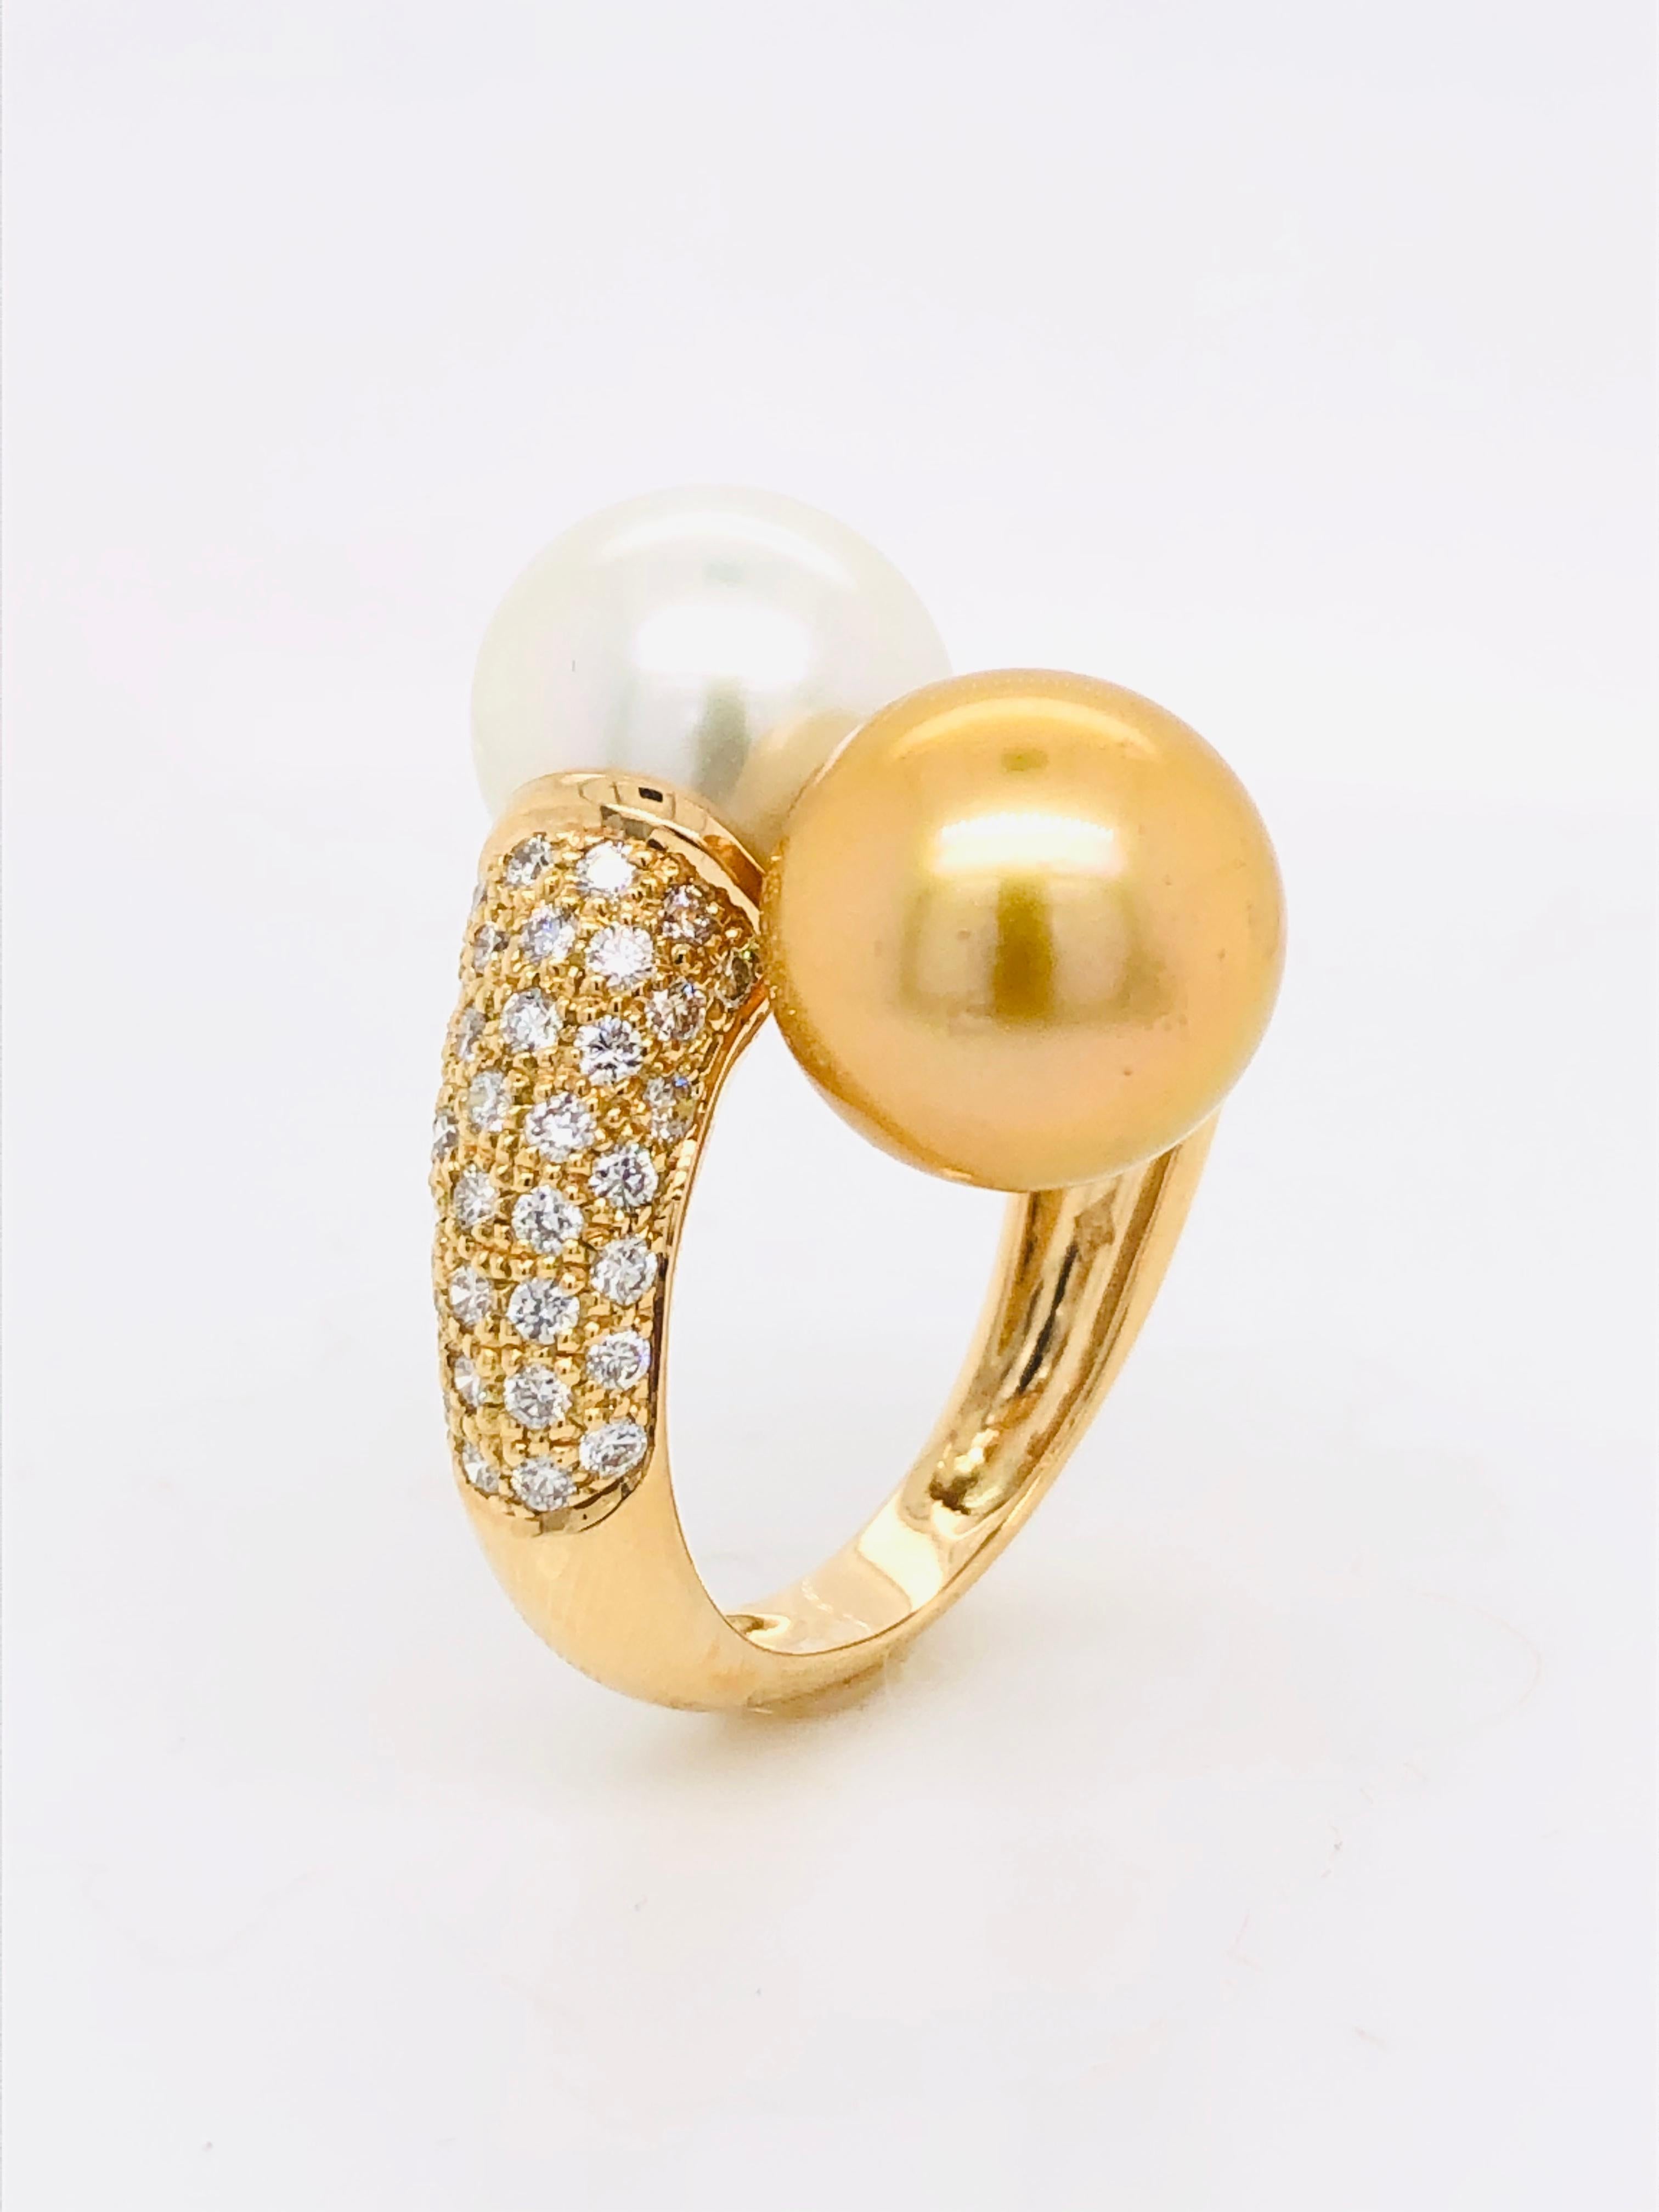 Brilliant Cut South Sea Pearls with White Diamonds on Gold 18 Carat Ring